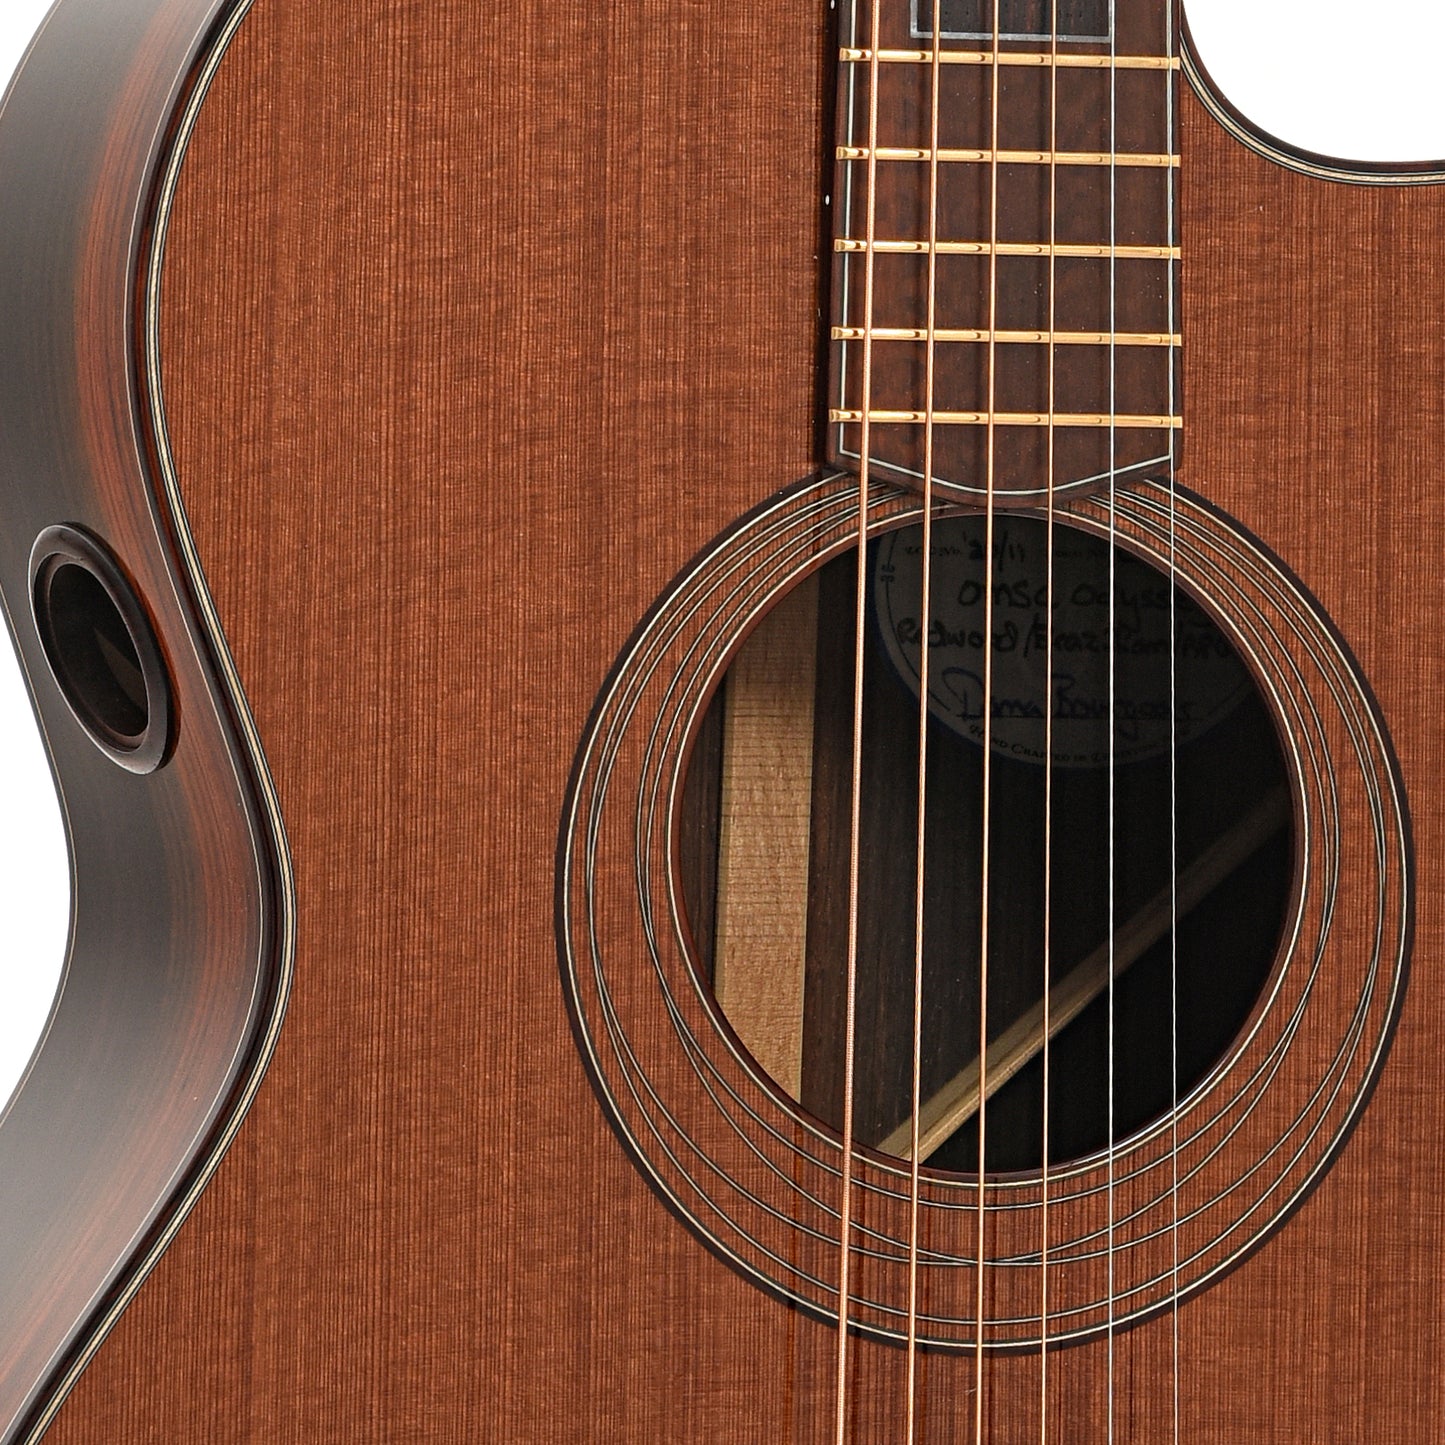 Sound hole and side sound hole of Bourgeois OMSC Odyssey Brazilian Rosewood Acoustic Guitar